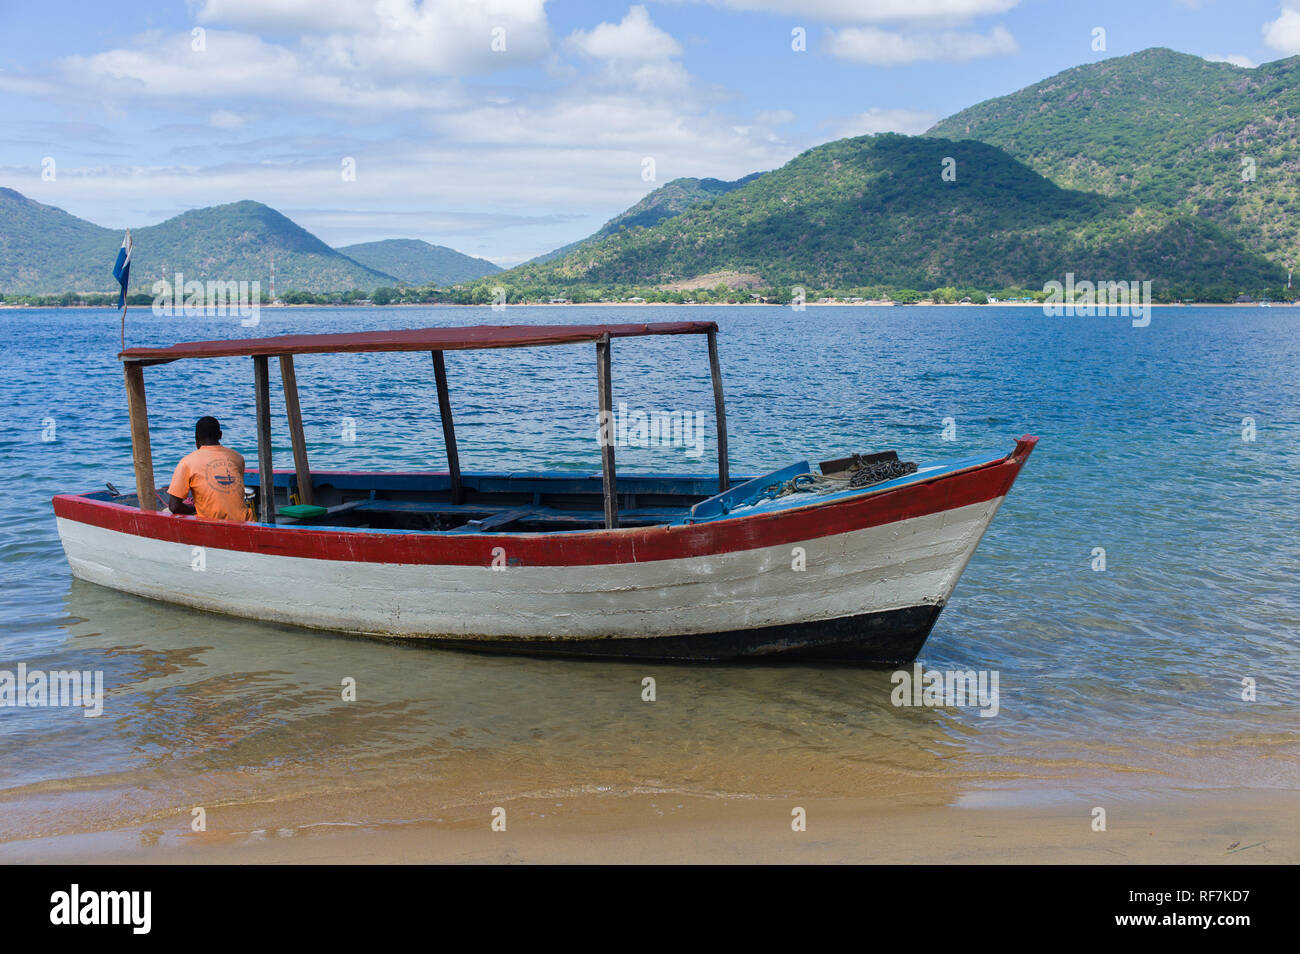 Cape Maclear at the southern end of Lake Malawi is a picturesque spot on the lake popular with tourists; it is in Lake Malawi National Park. Stock Photo